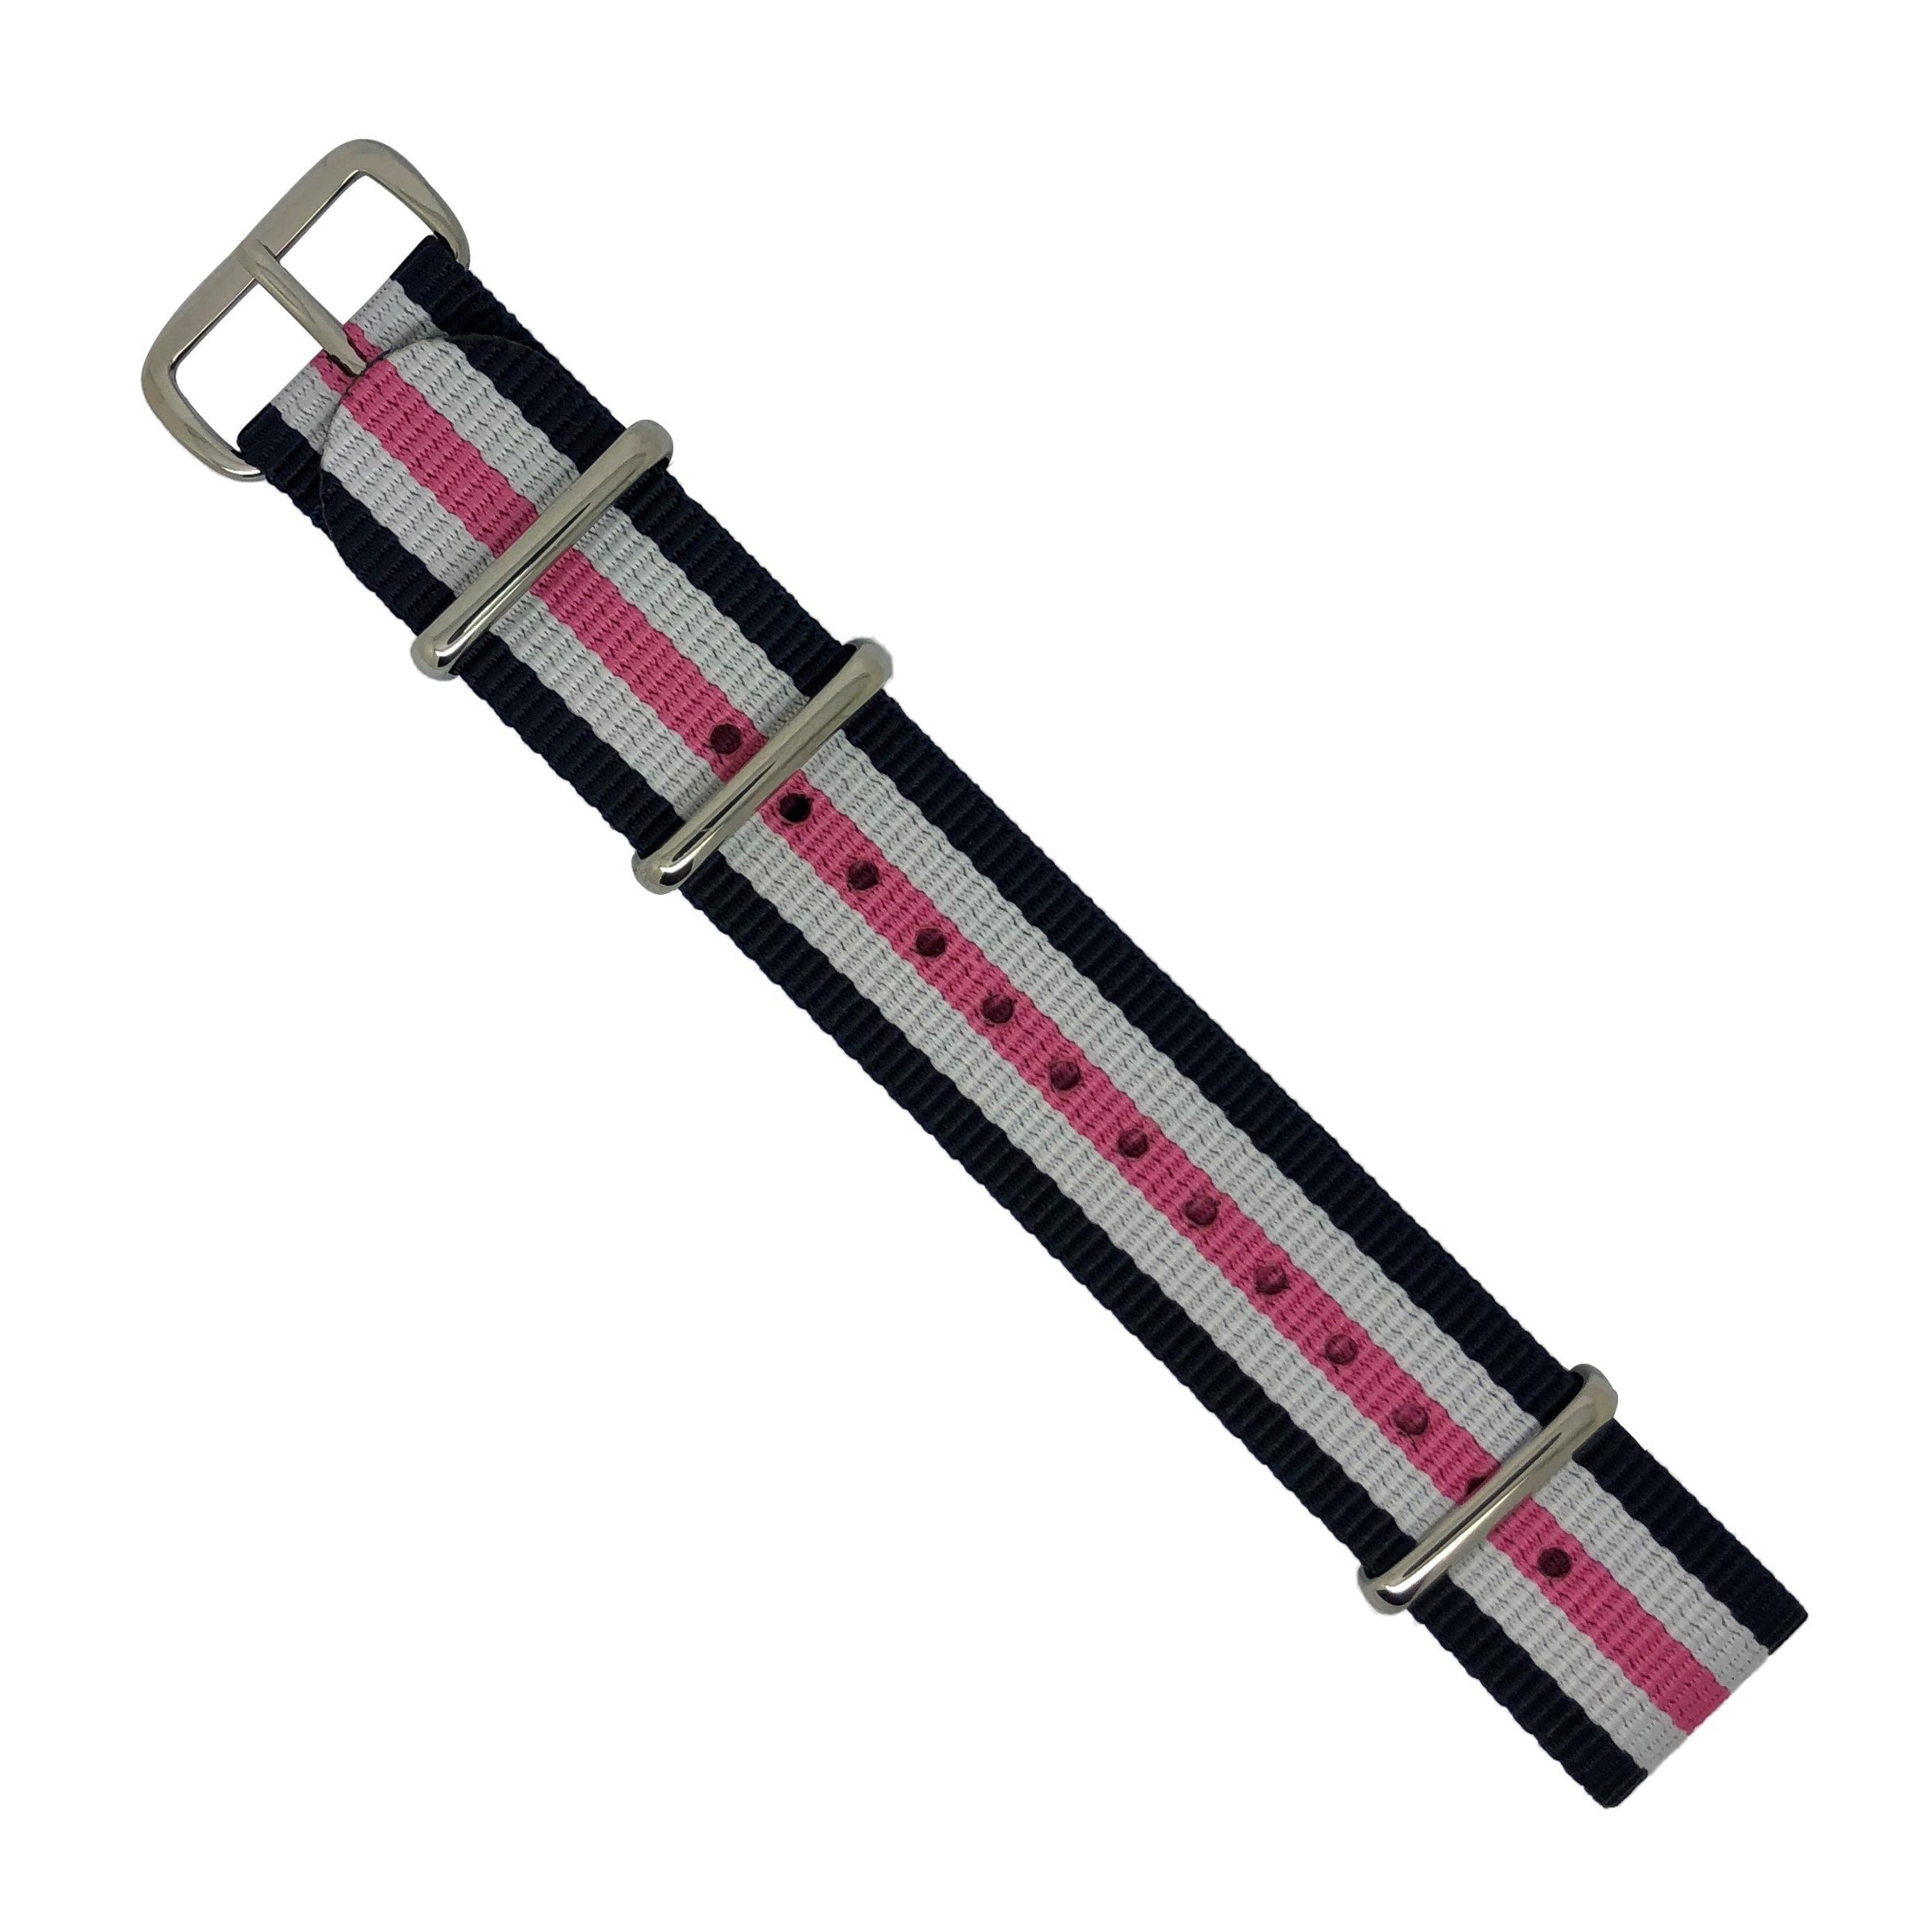 Premium Nato Strap in Regimental Pink with Polished Silver Buckle (20mm) - Nomad Watch Works Malaysia